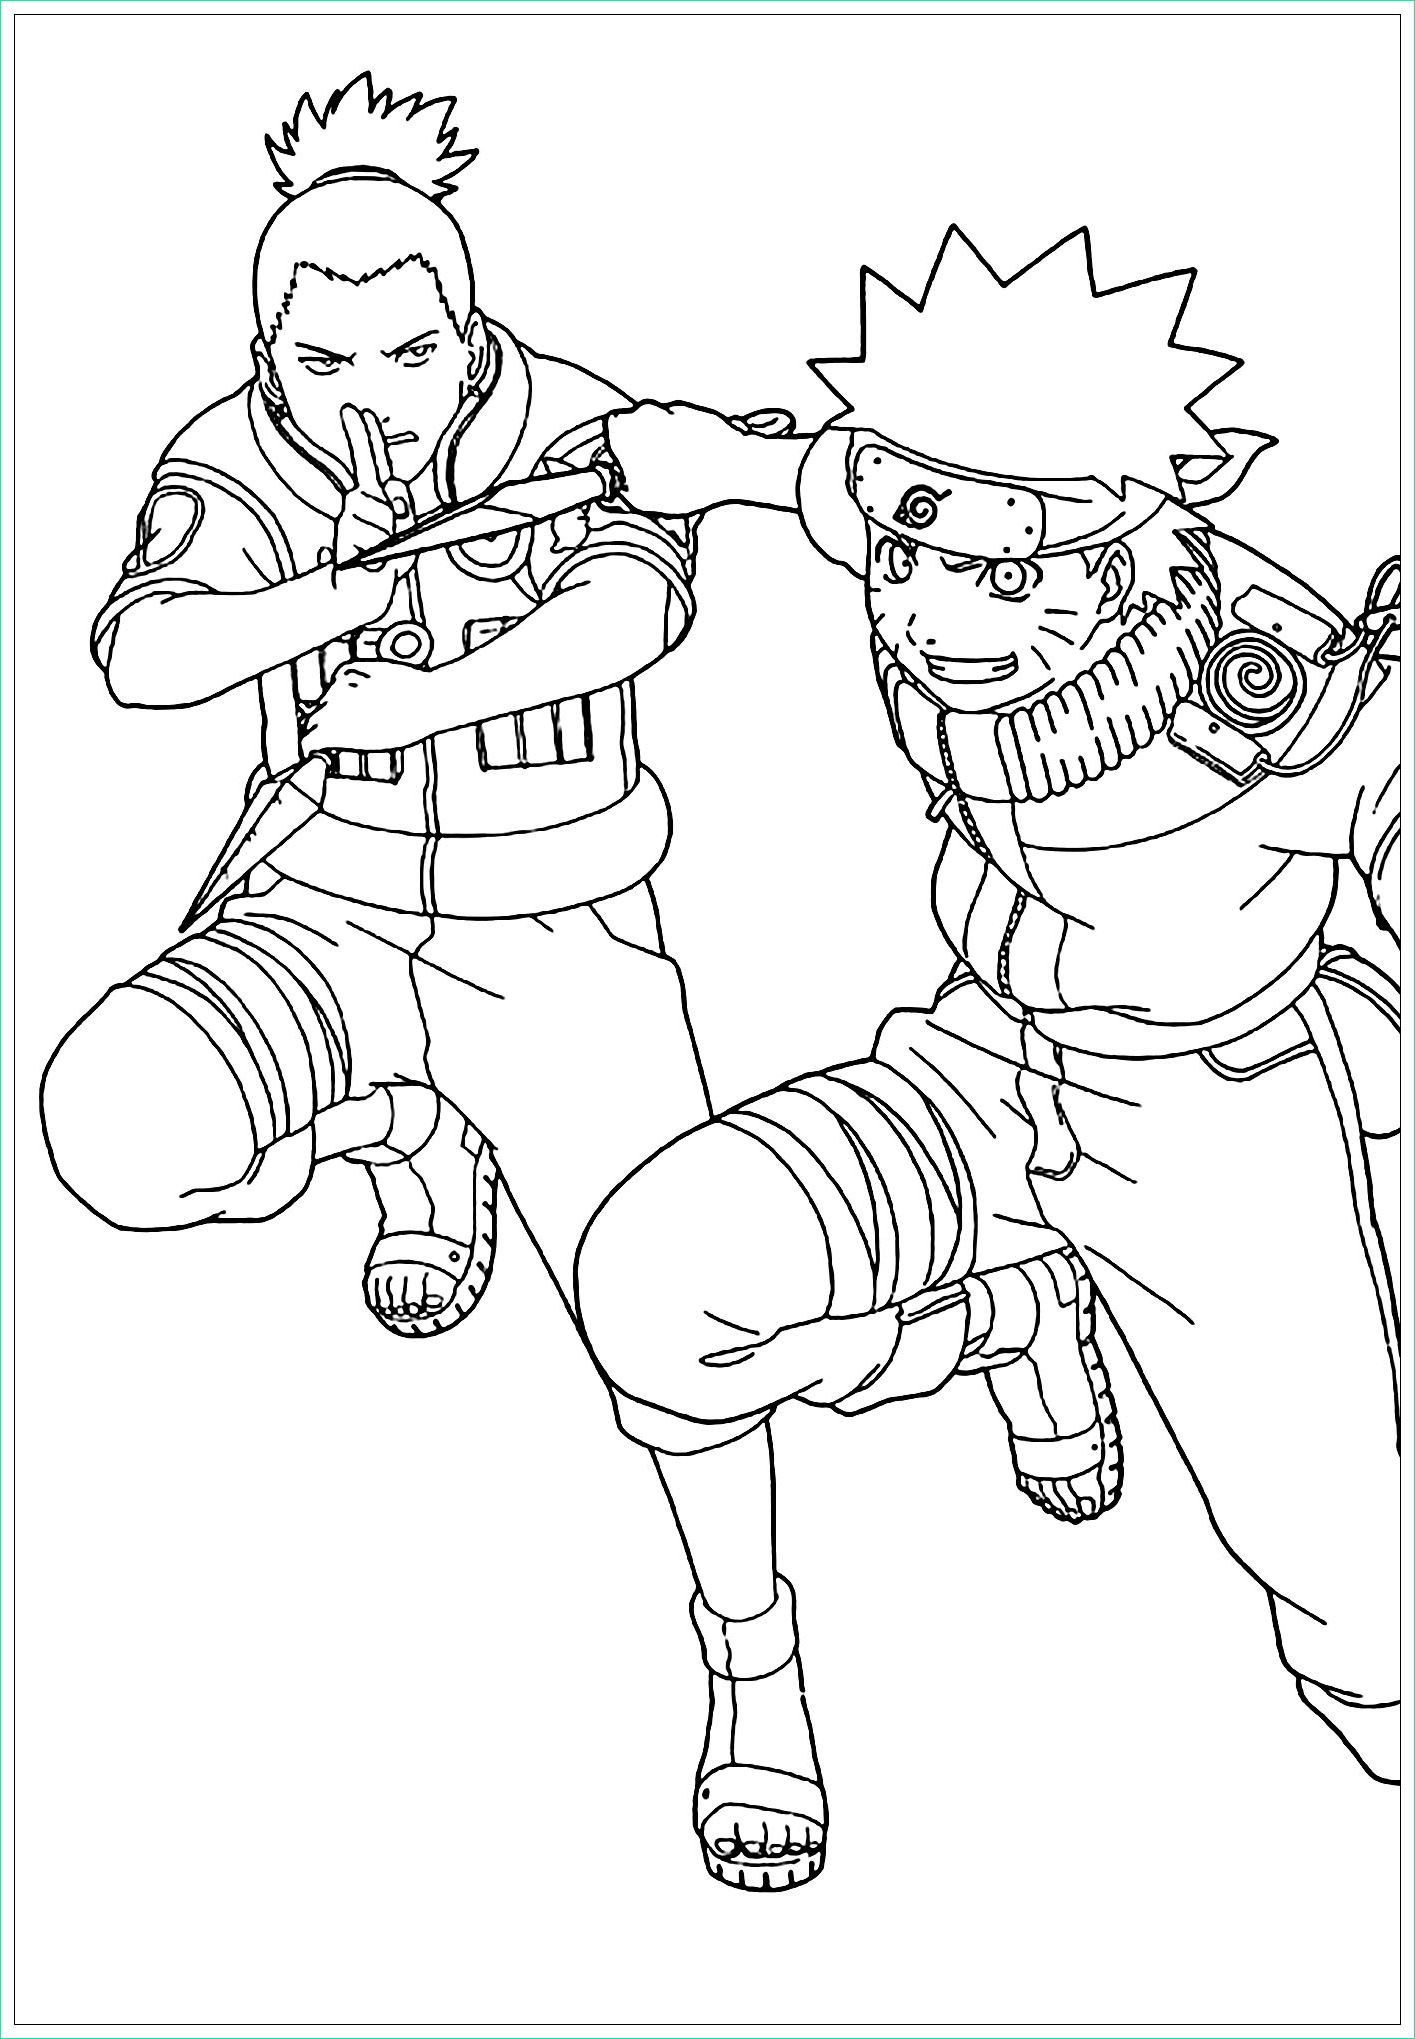 image=naruto coloring pages for children naruto 1